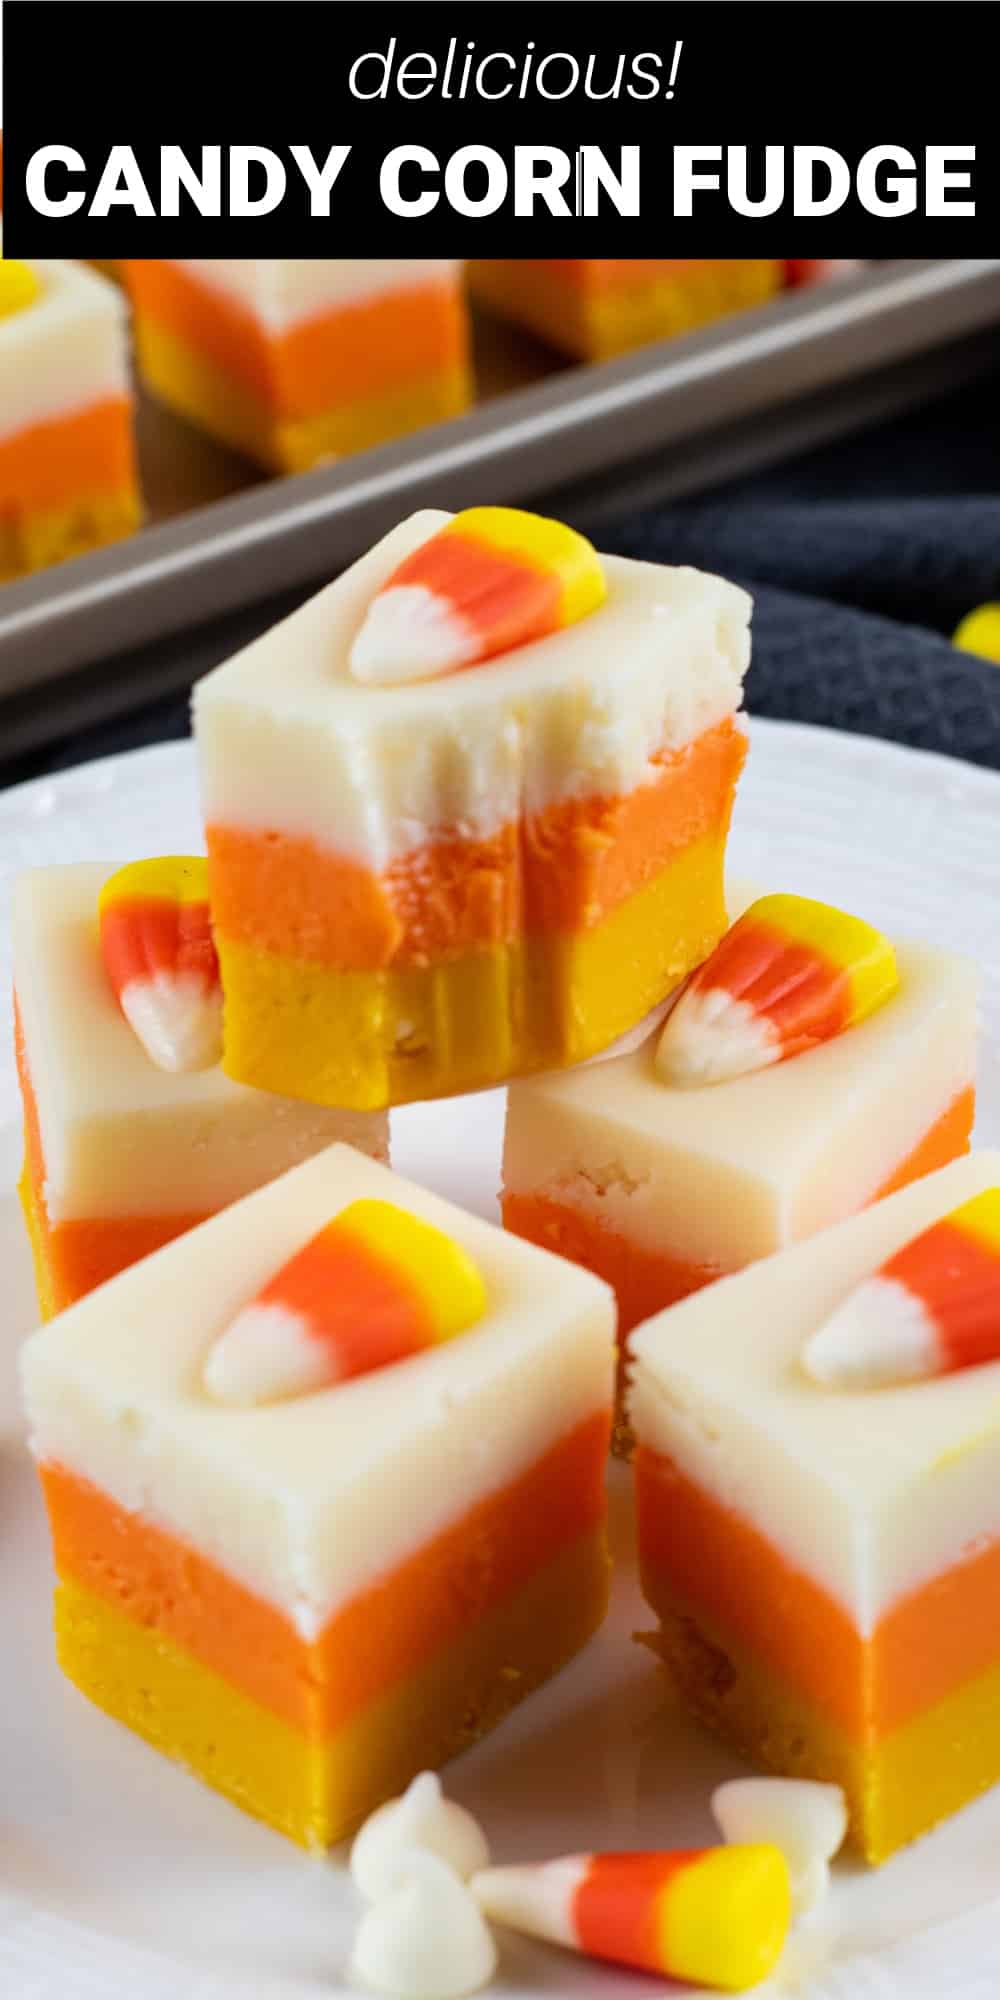 This white chocolate Layered Candy Corn Fudge is a fun and festive fall-themed treat that looks just like candy corn! With only a handful of ingredients and a few easy steps, you’ll have a rich and creamy layered candy confection that will get rave reviews at your next Halloween party. 